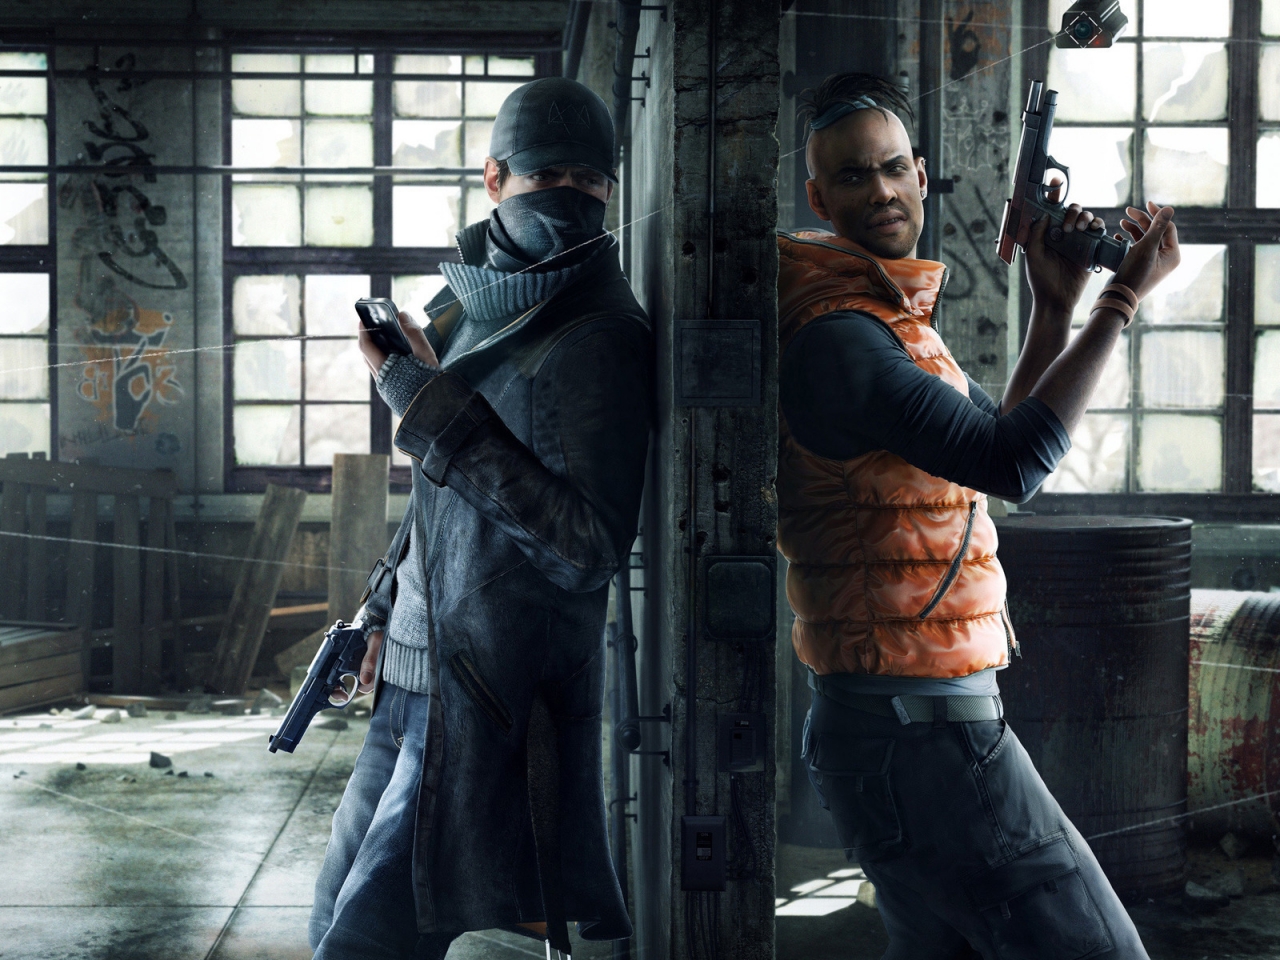 Watchdogs Aiden and Wade for 1280 x 960 resolution